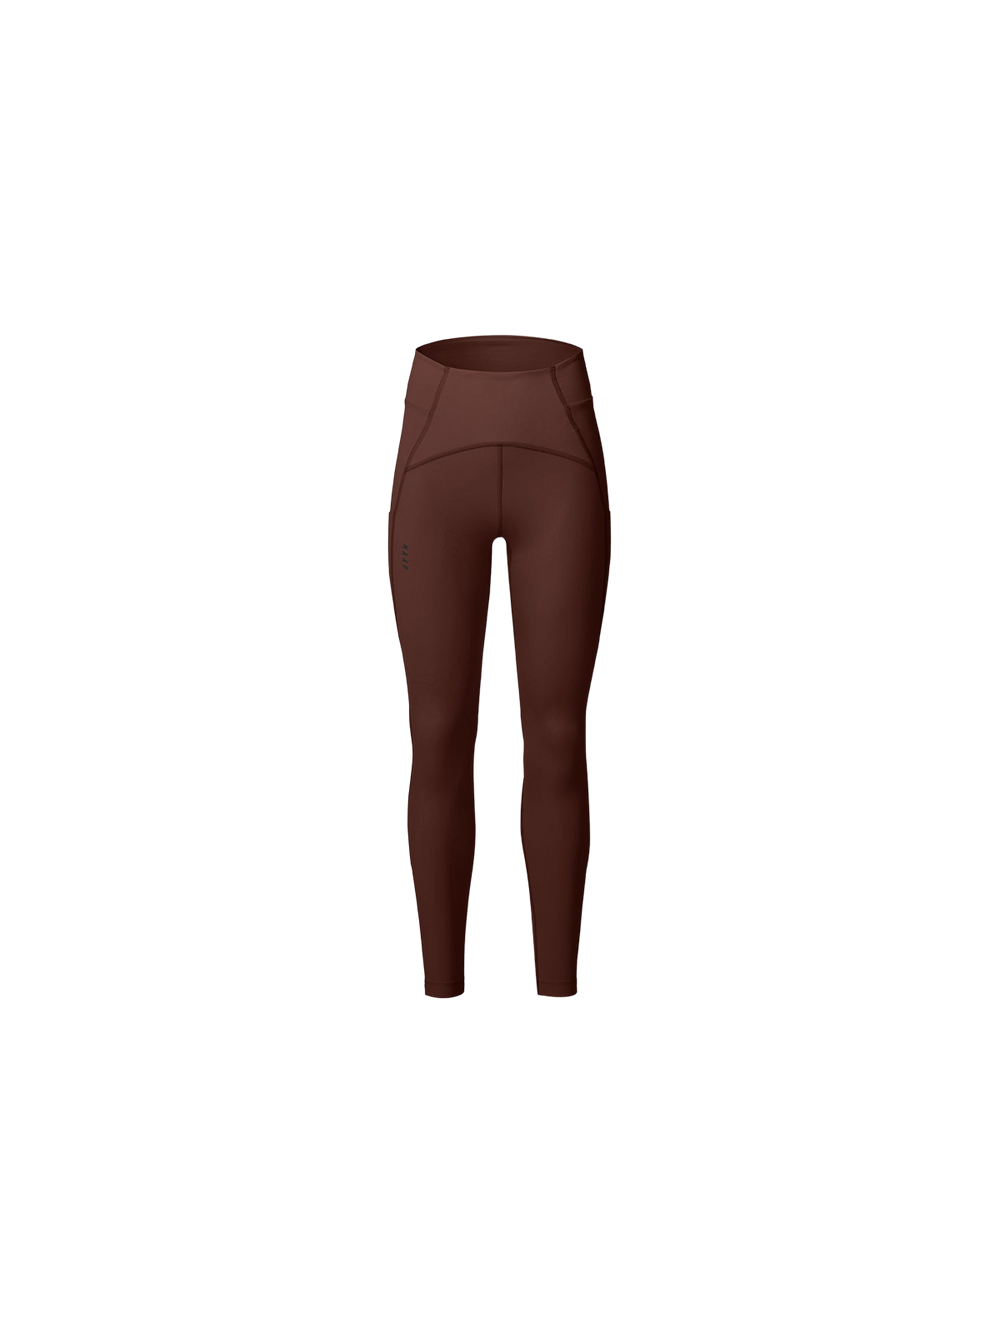 Product Image for Women's Everyday Legging